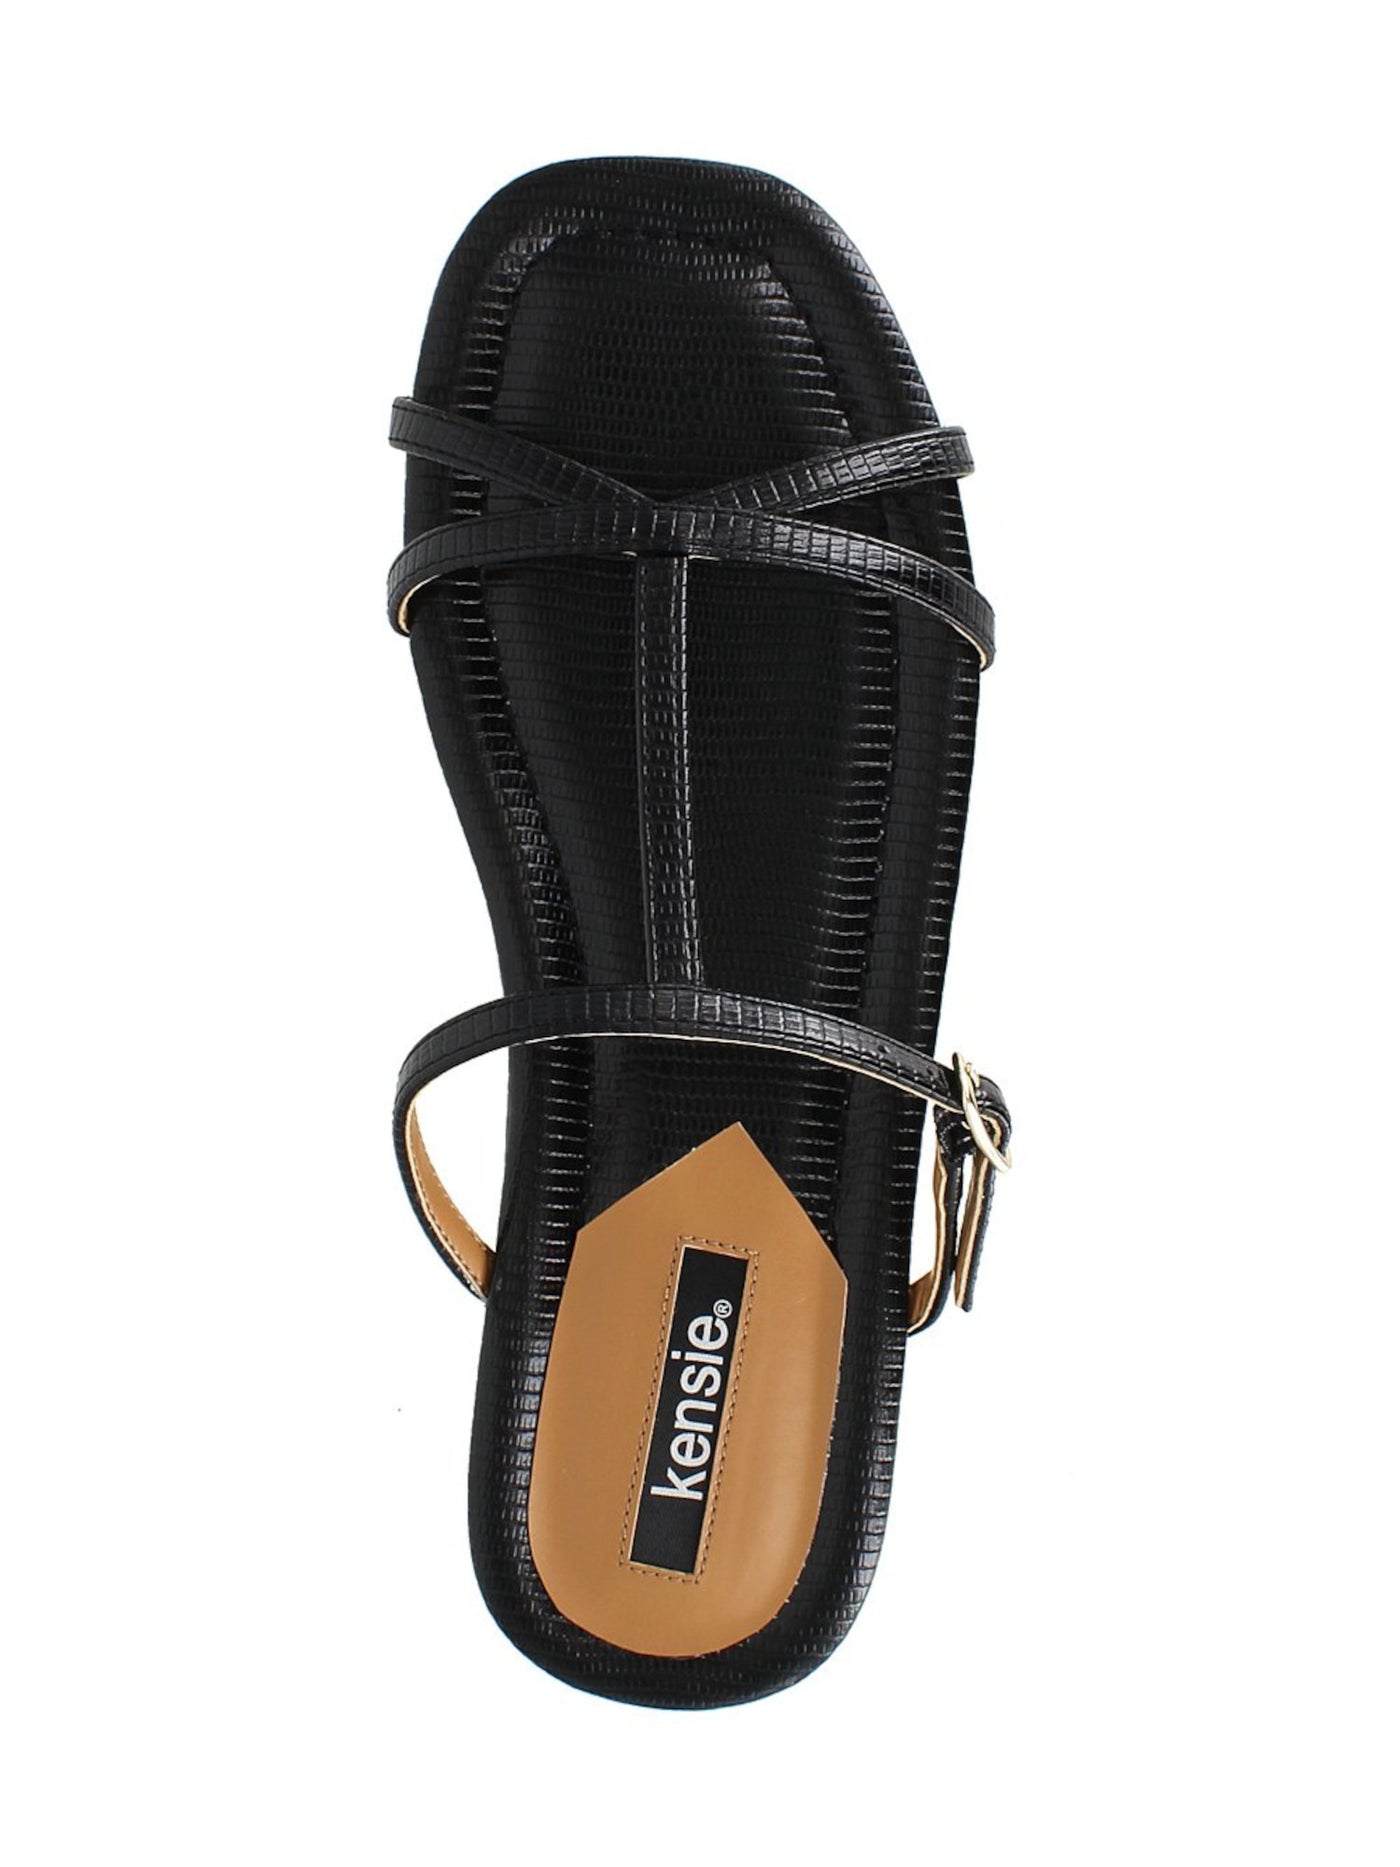 KENSIE Womens Black Buckle Accent T-Strap Dara Square Toe Wedge Slip On Slide Sandals Shoes 7.5 M